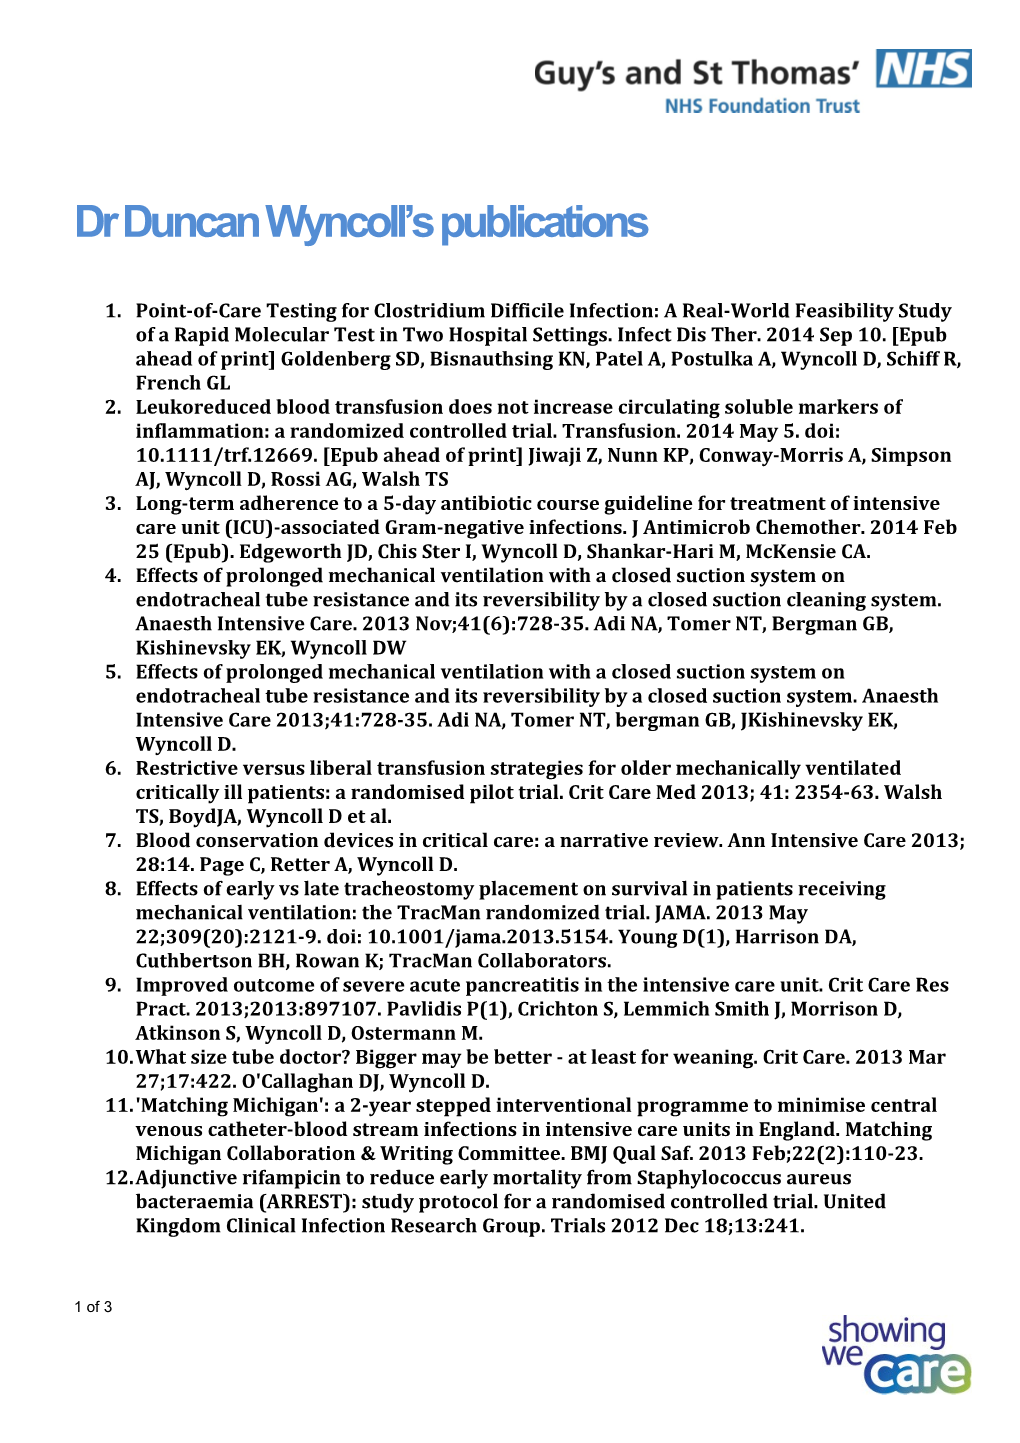 Dr Duncan Wyncoll's Publications